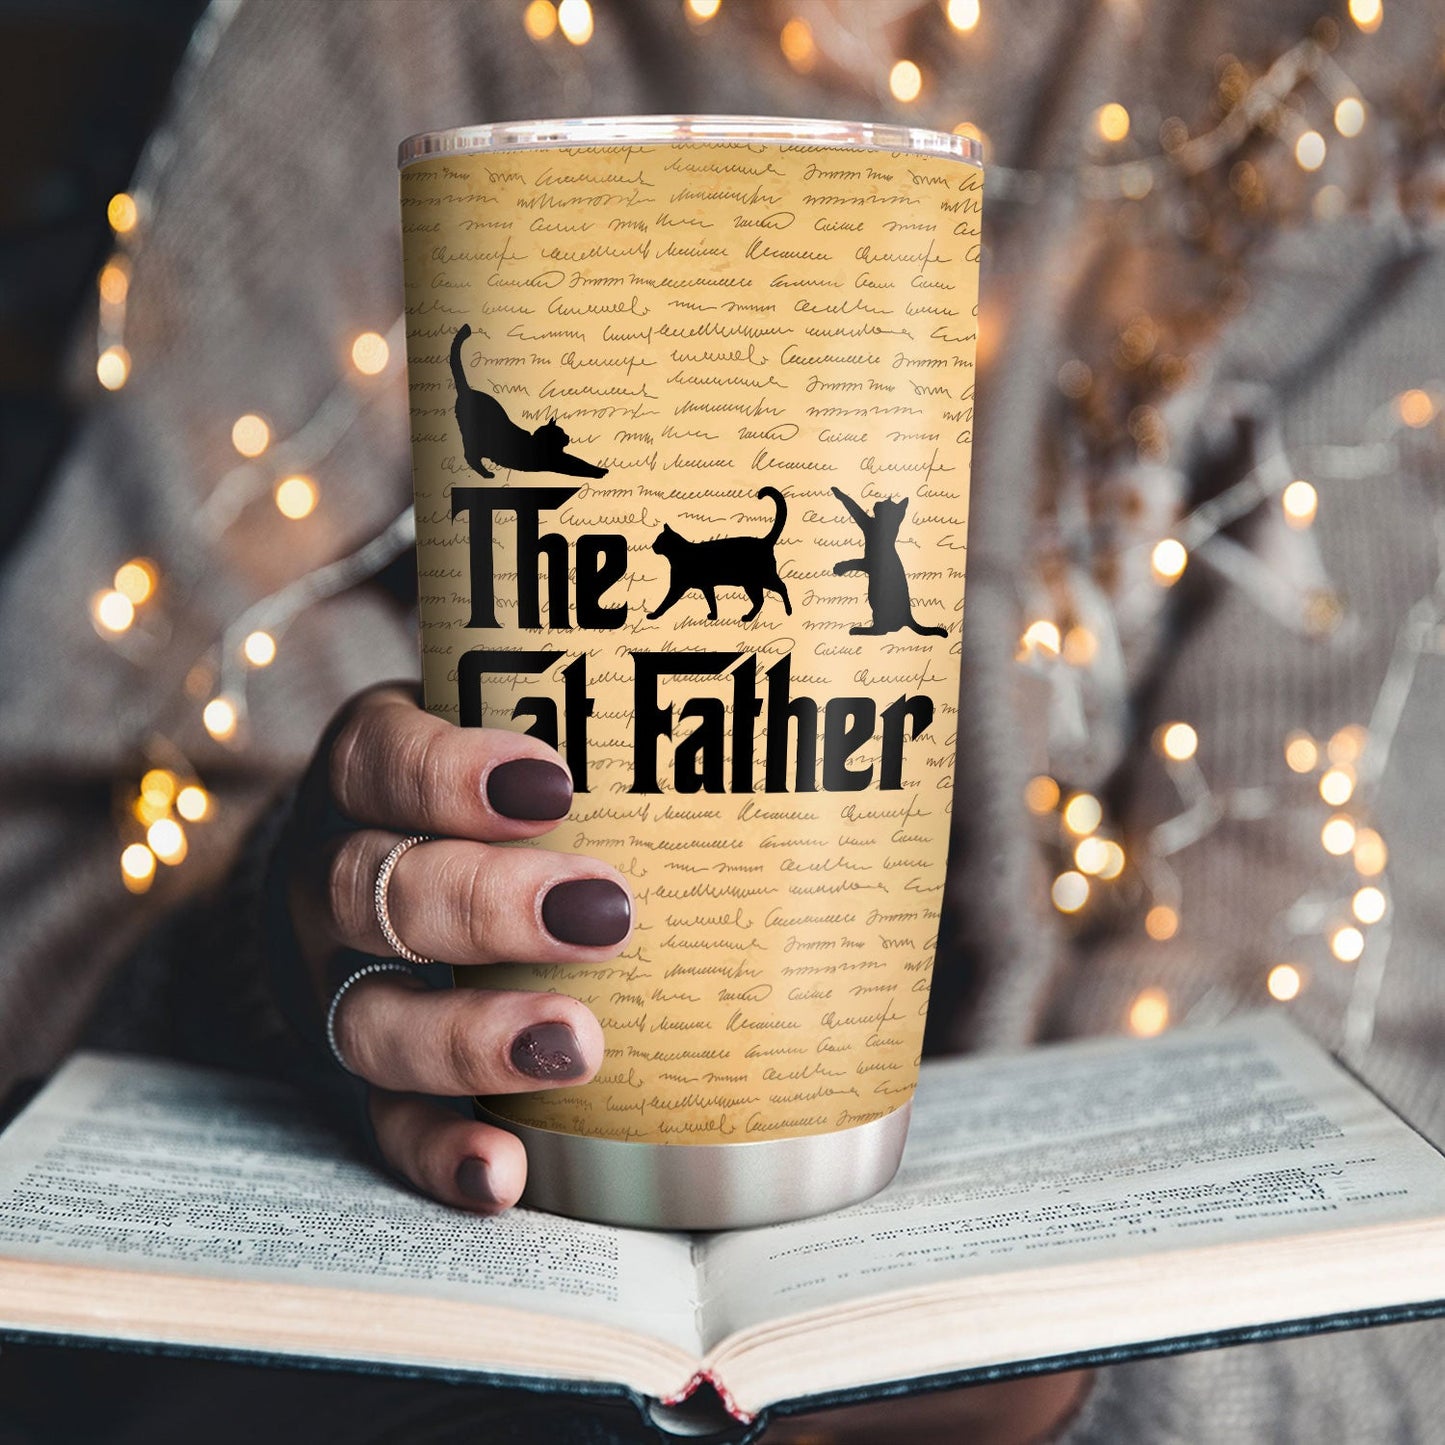 The Cat Father Cat Dad Fathers Day Vintage 20Oz Tumbler